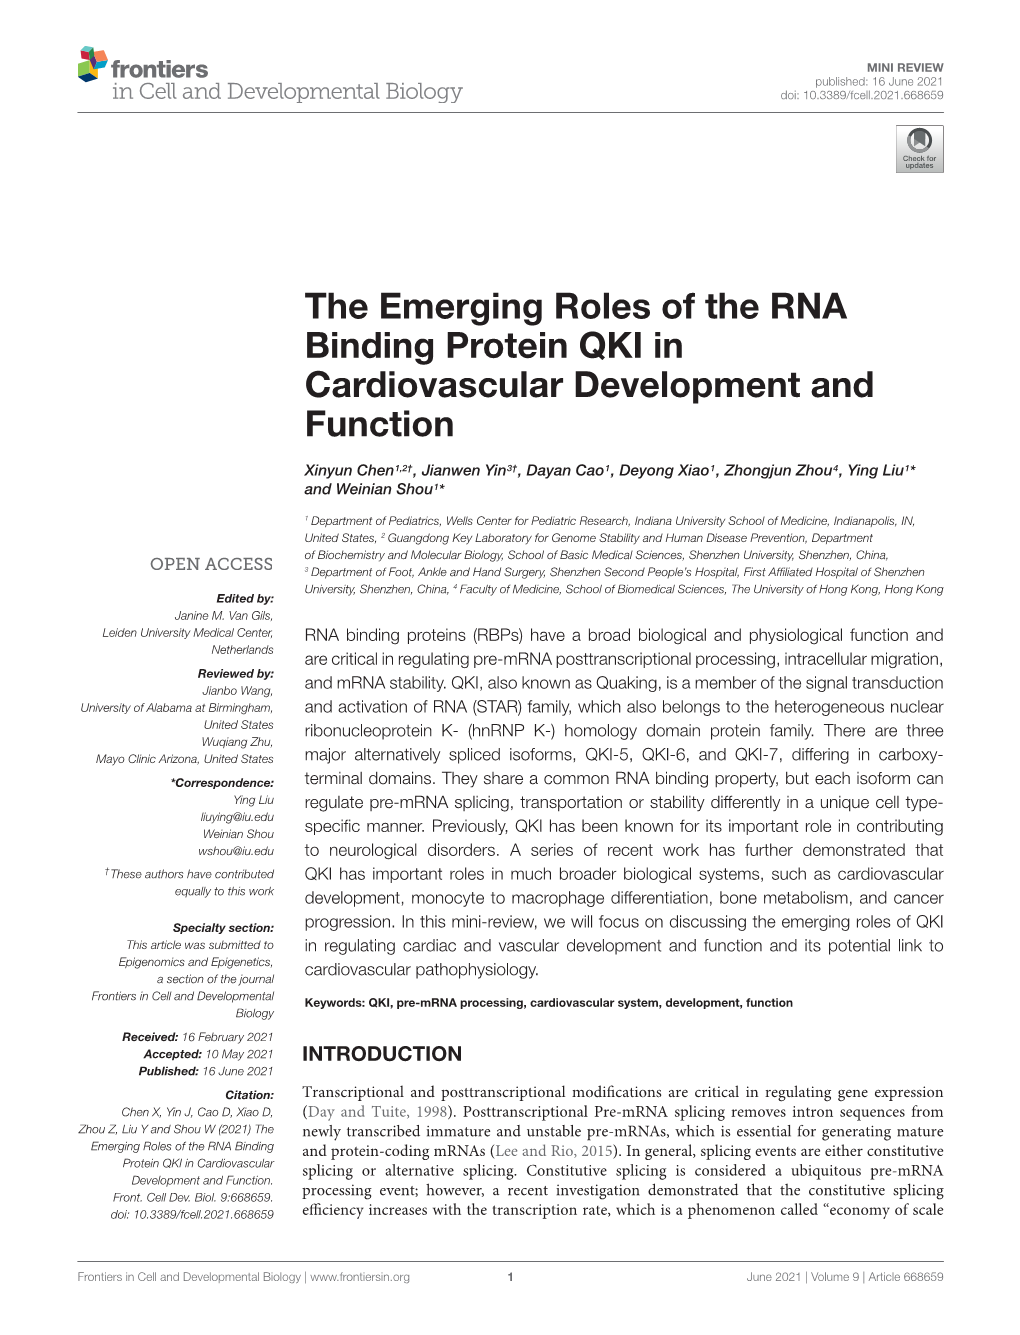 The Emerging Roles of the RNA Binding Protein QKI in Cardiovascular Development and Function